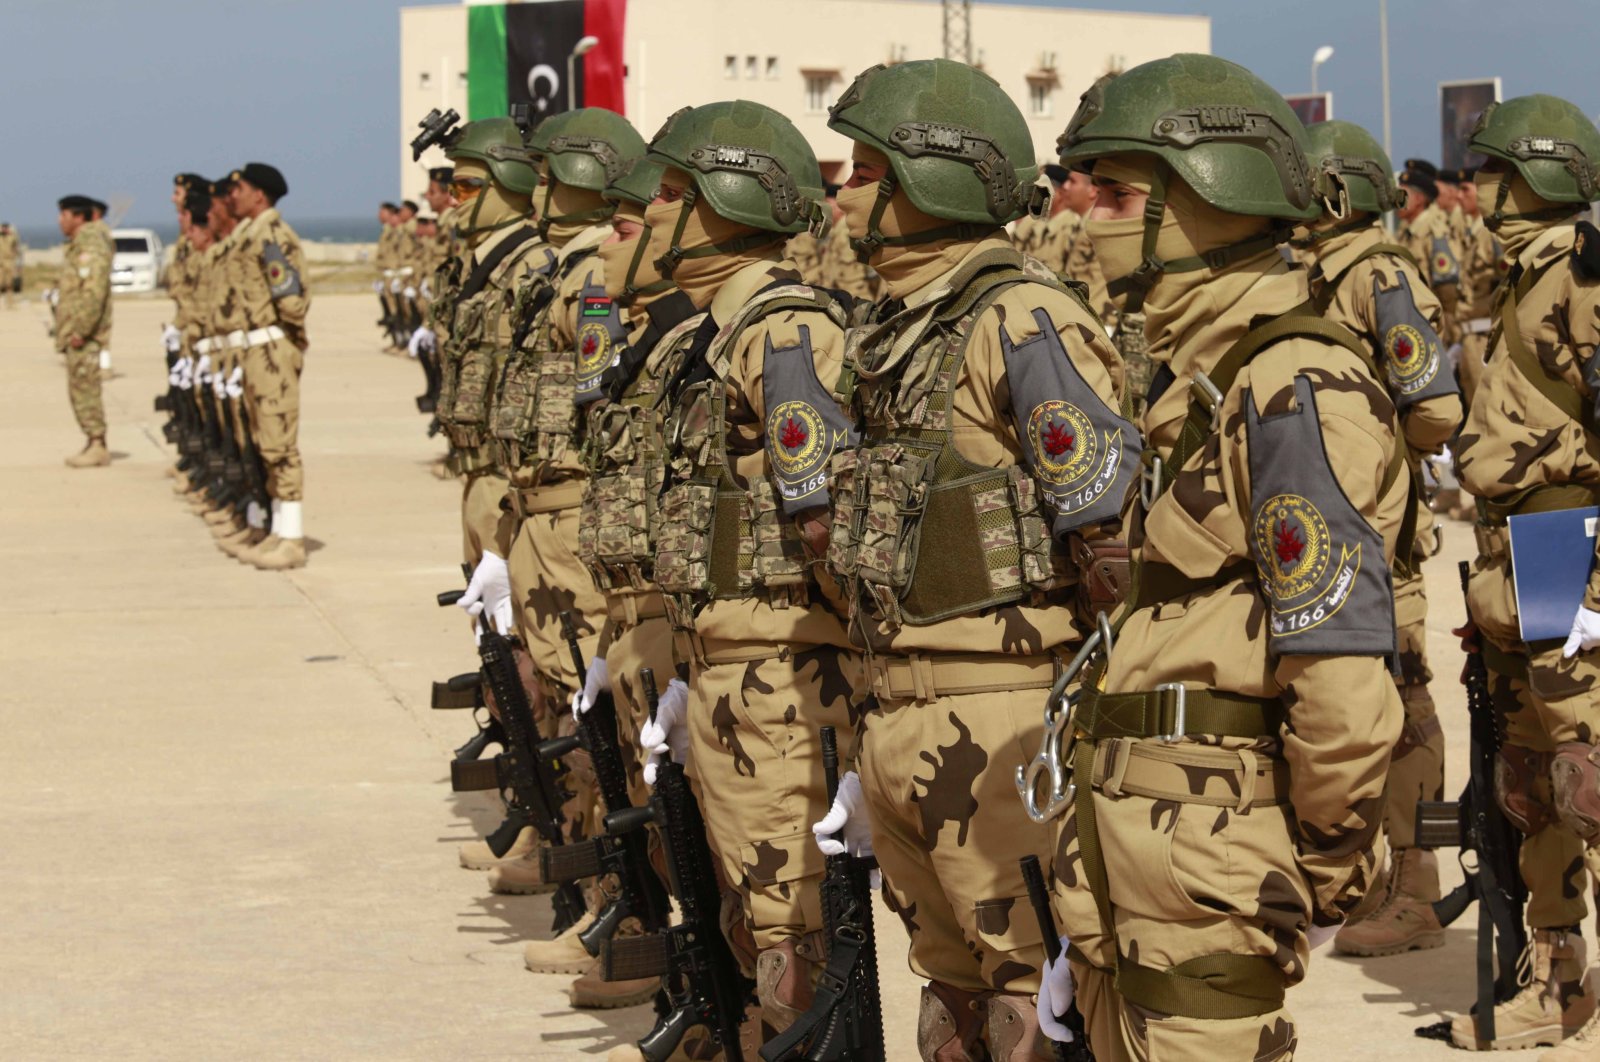 The supportive force of the Libyan army condemns